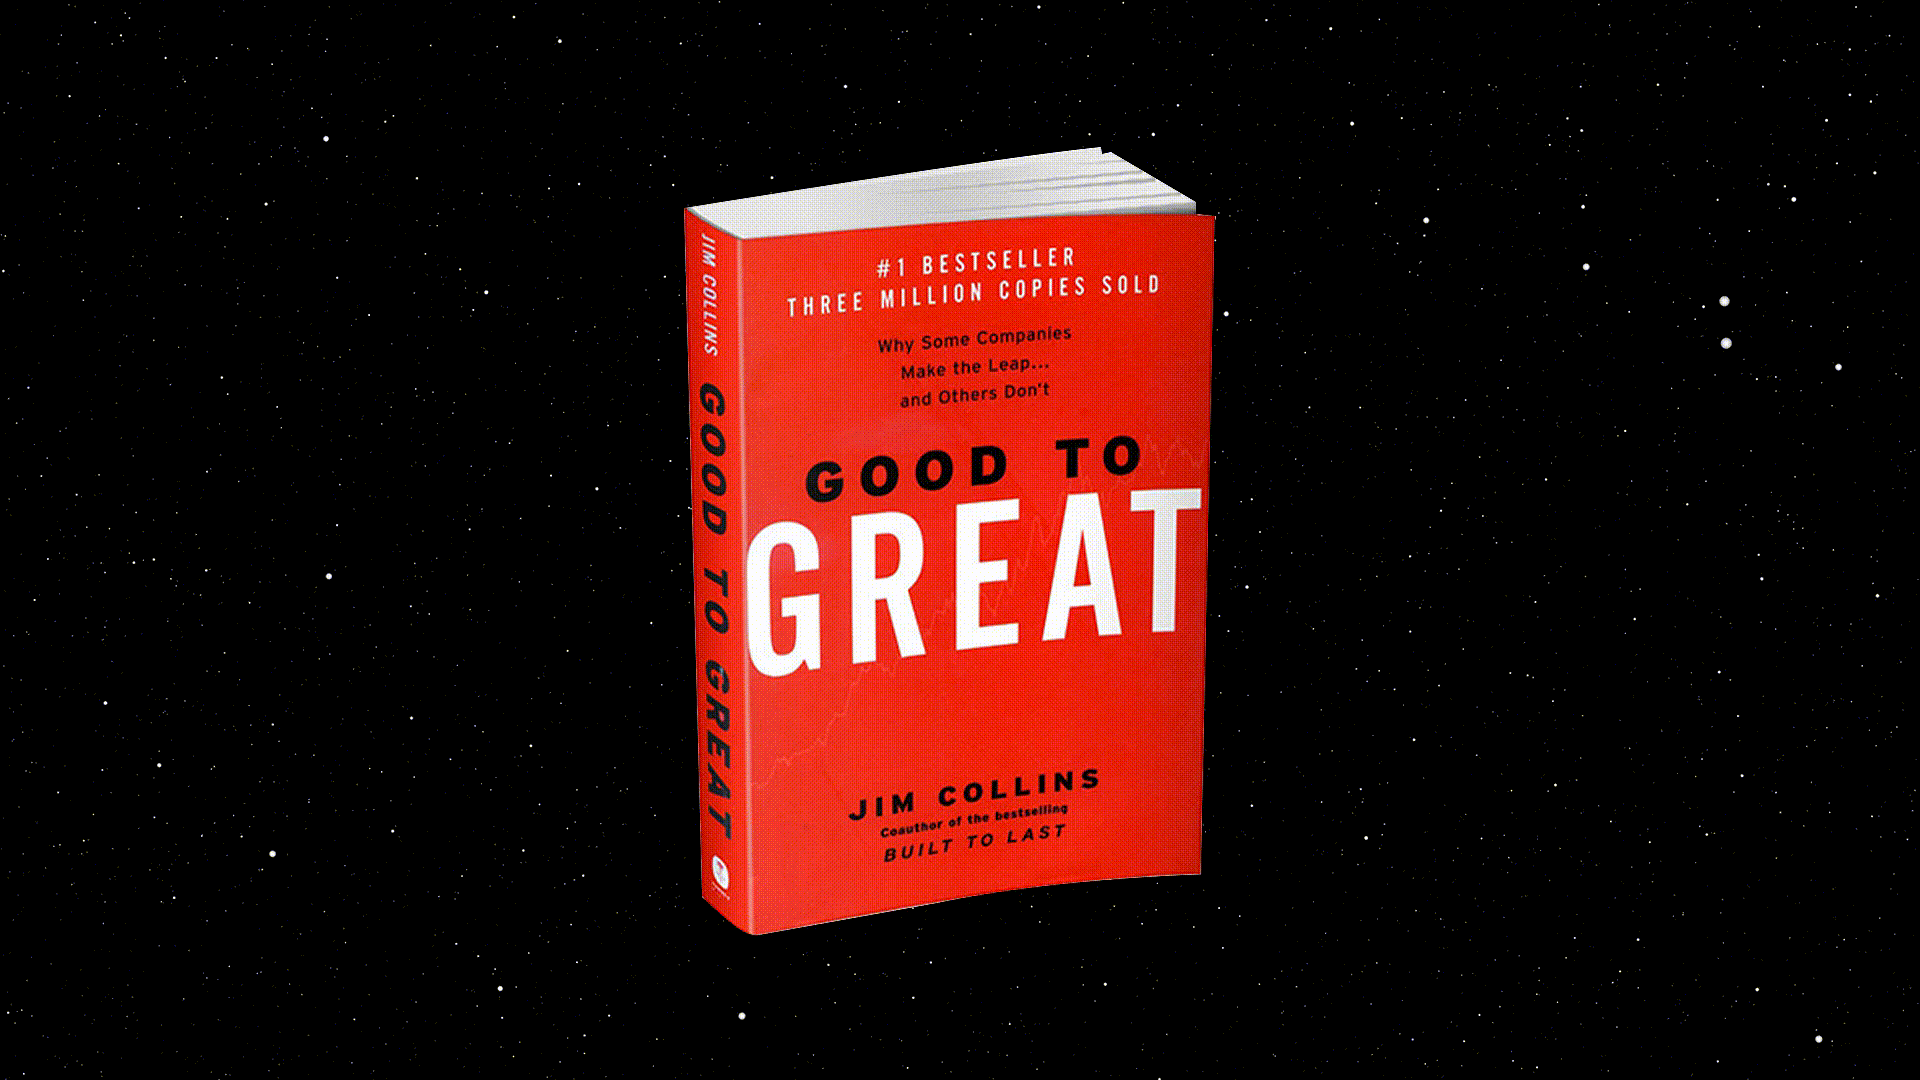 The book cover for Good to Great by Jim Collins